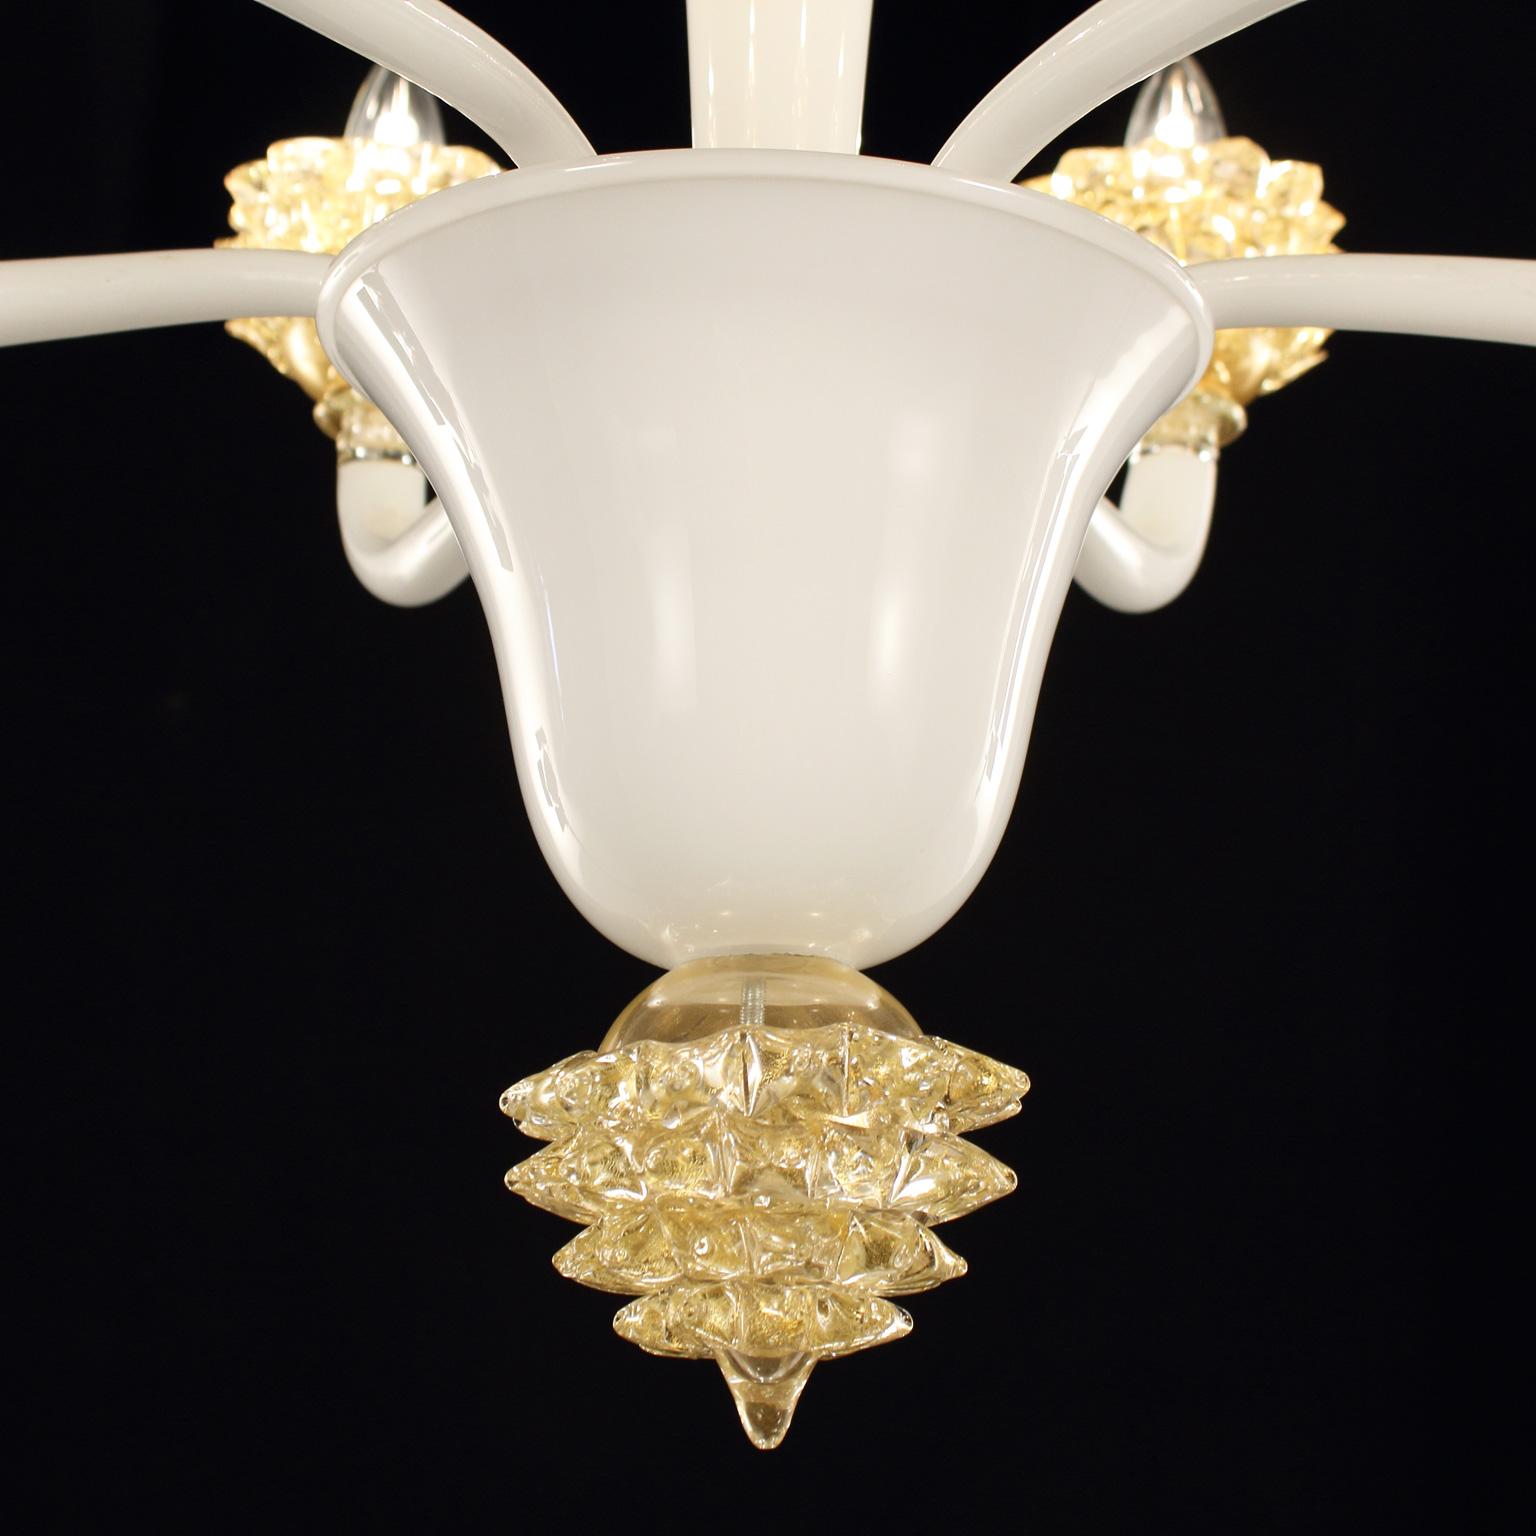 Italian Chandelier 6 arms White Encased Murano Glass Gold Rostri details by Multiforme For Sale